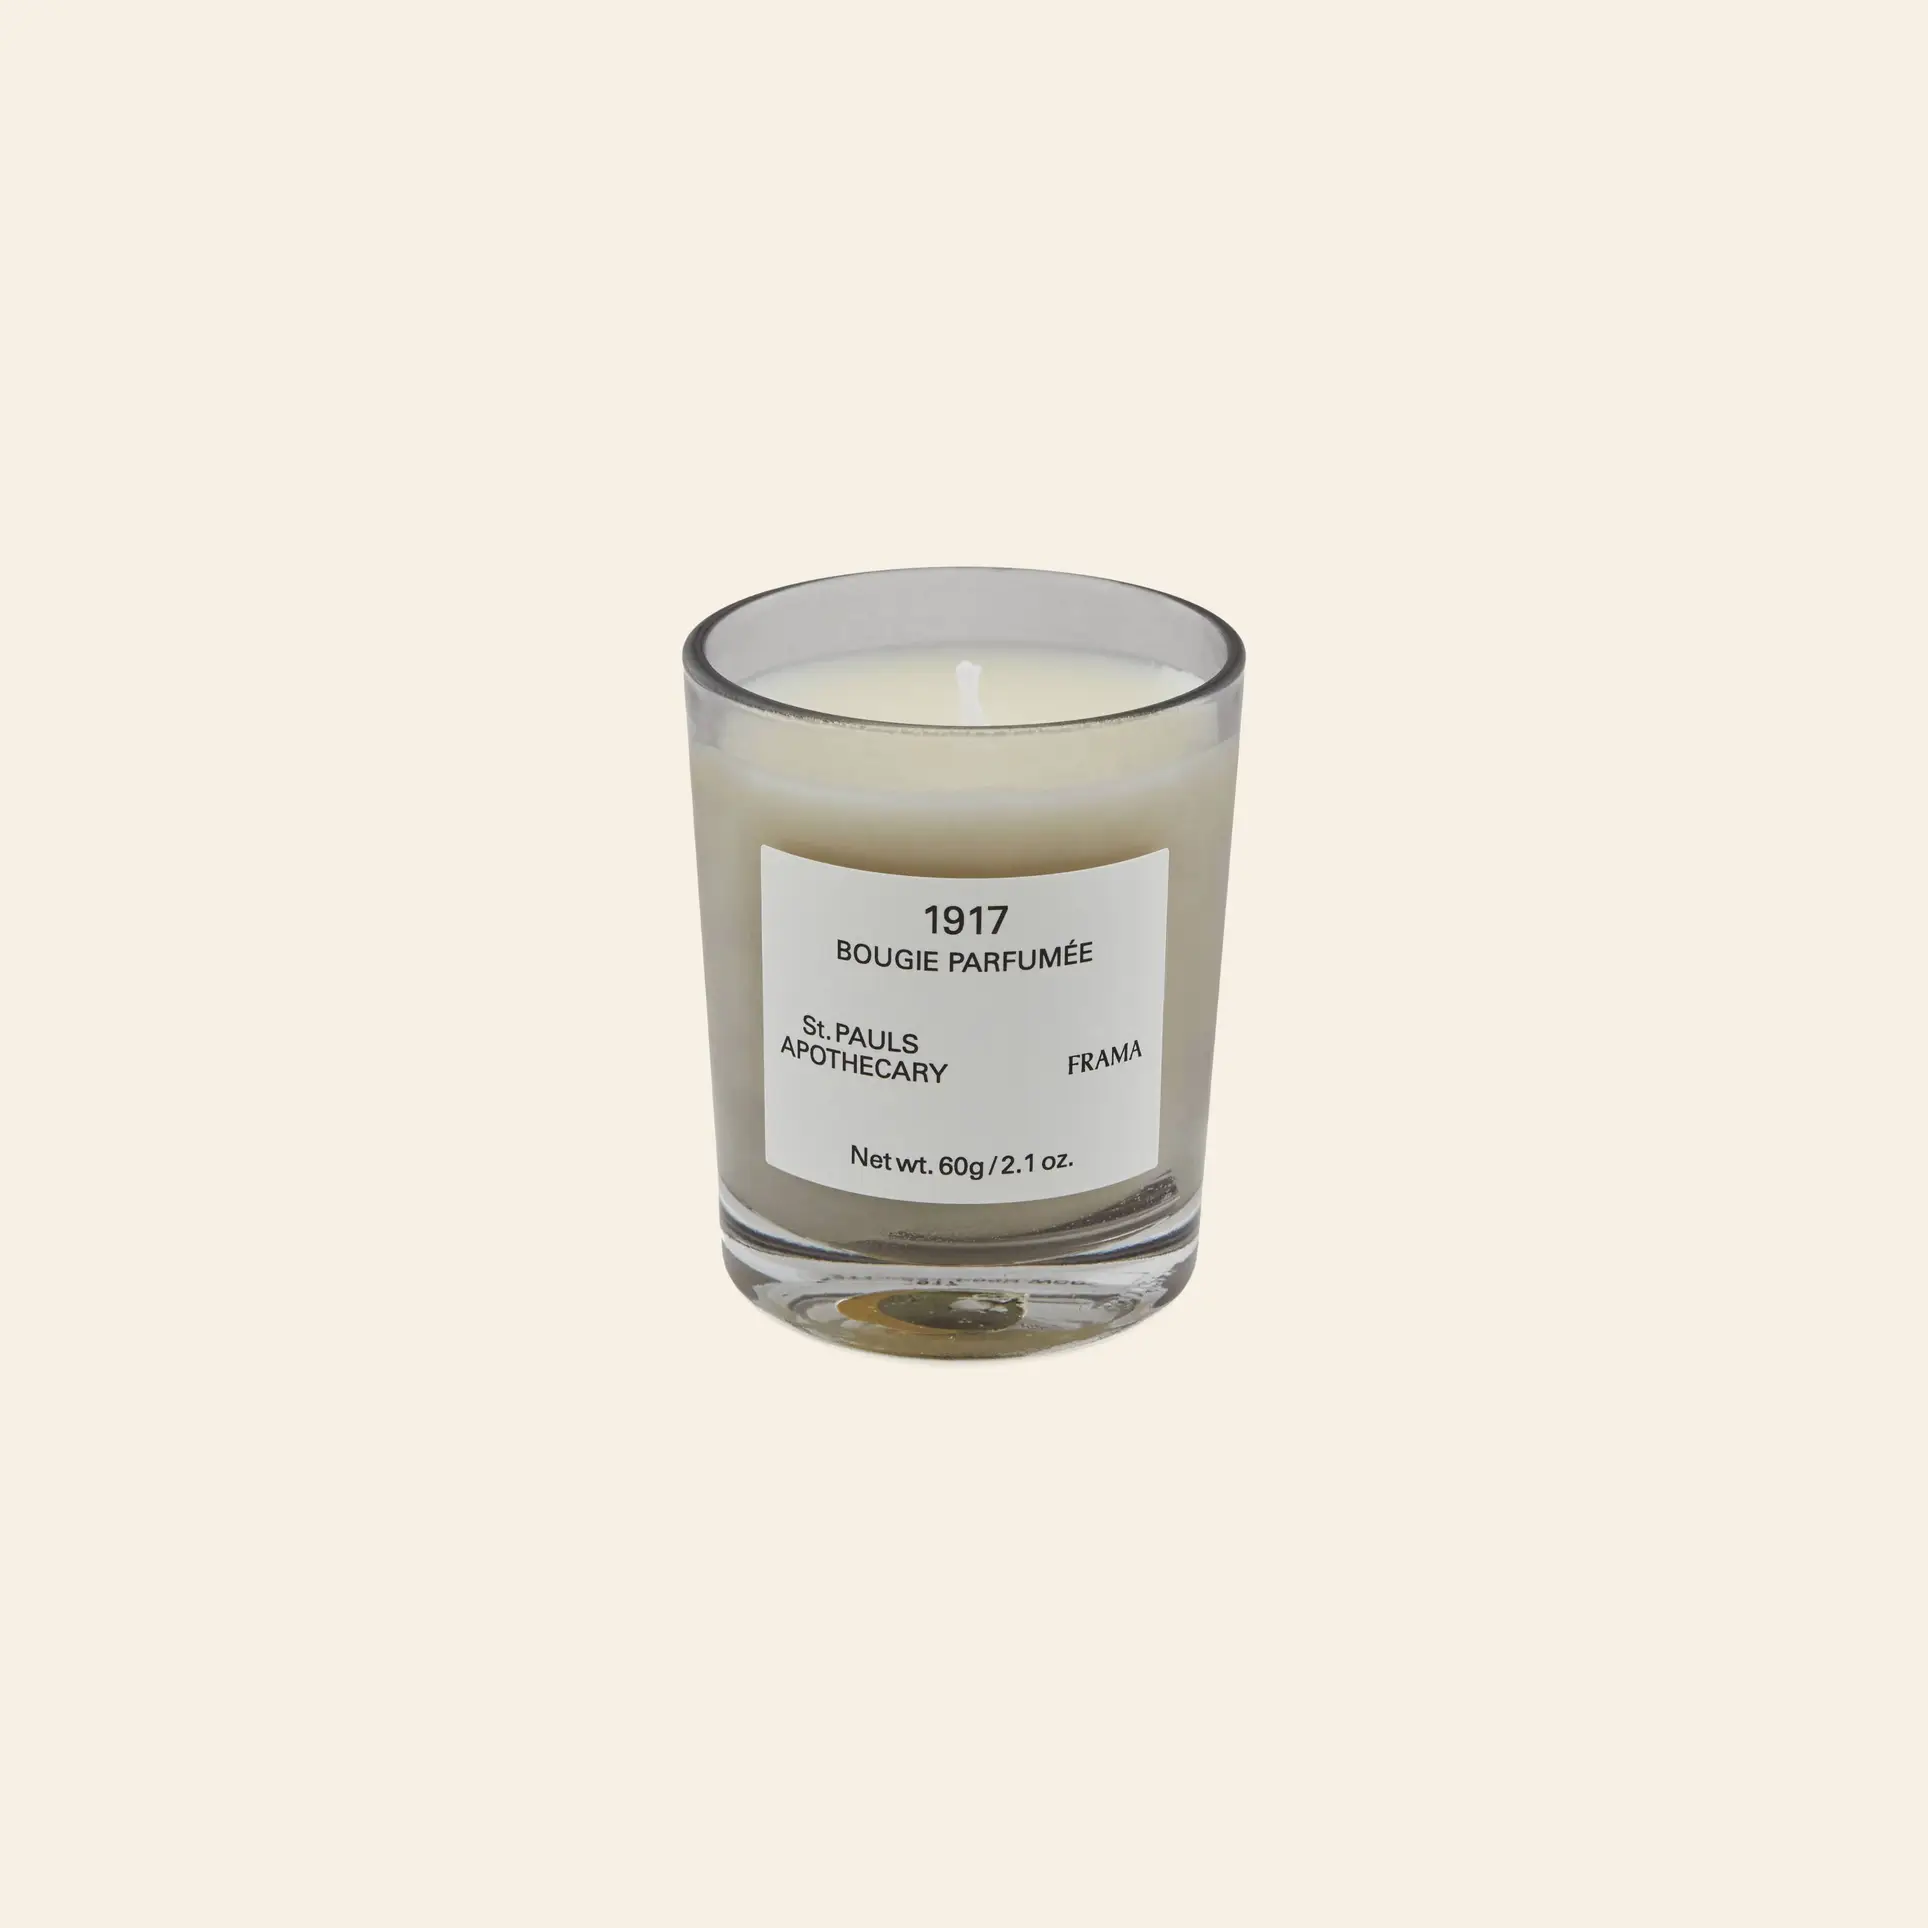 FRAMA 1917 Scented Candle, 60g - The Stacked Store Singapore